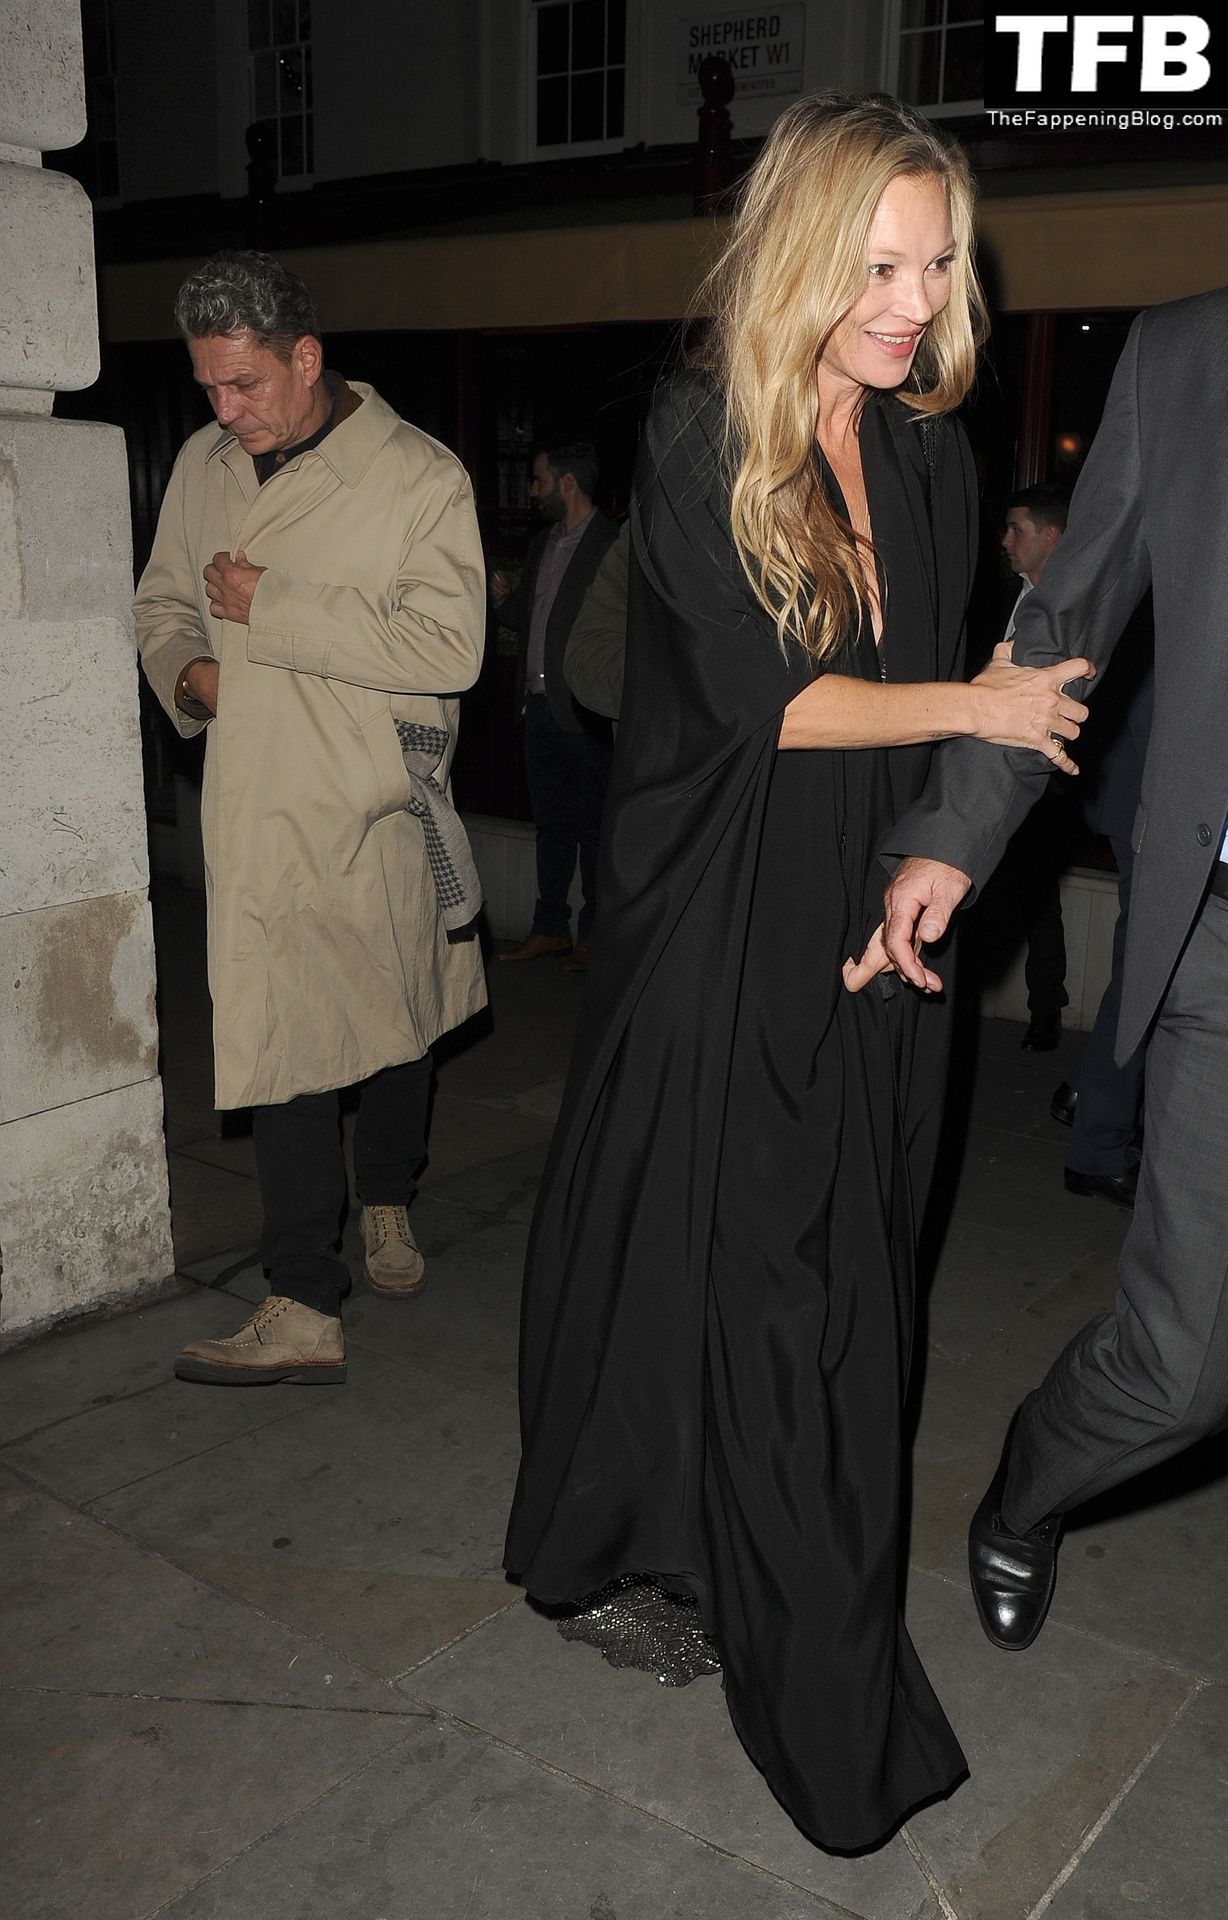 Kate Moss Flashes Nude Tits The Fappening Blog 118 - Kate Moss Flashes Her Nude Breasts in London (150 Photos)